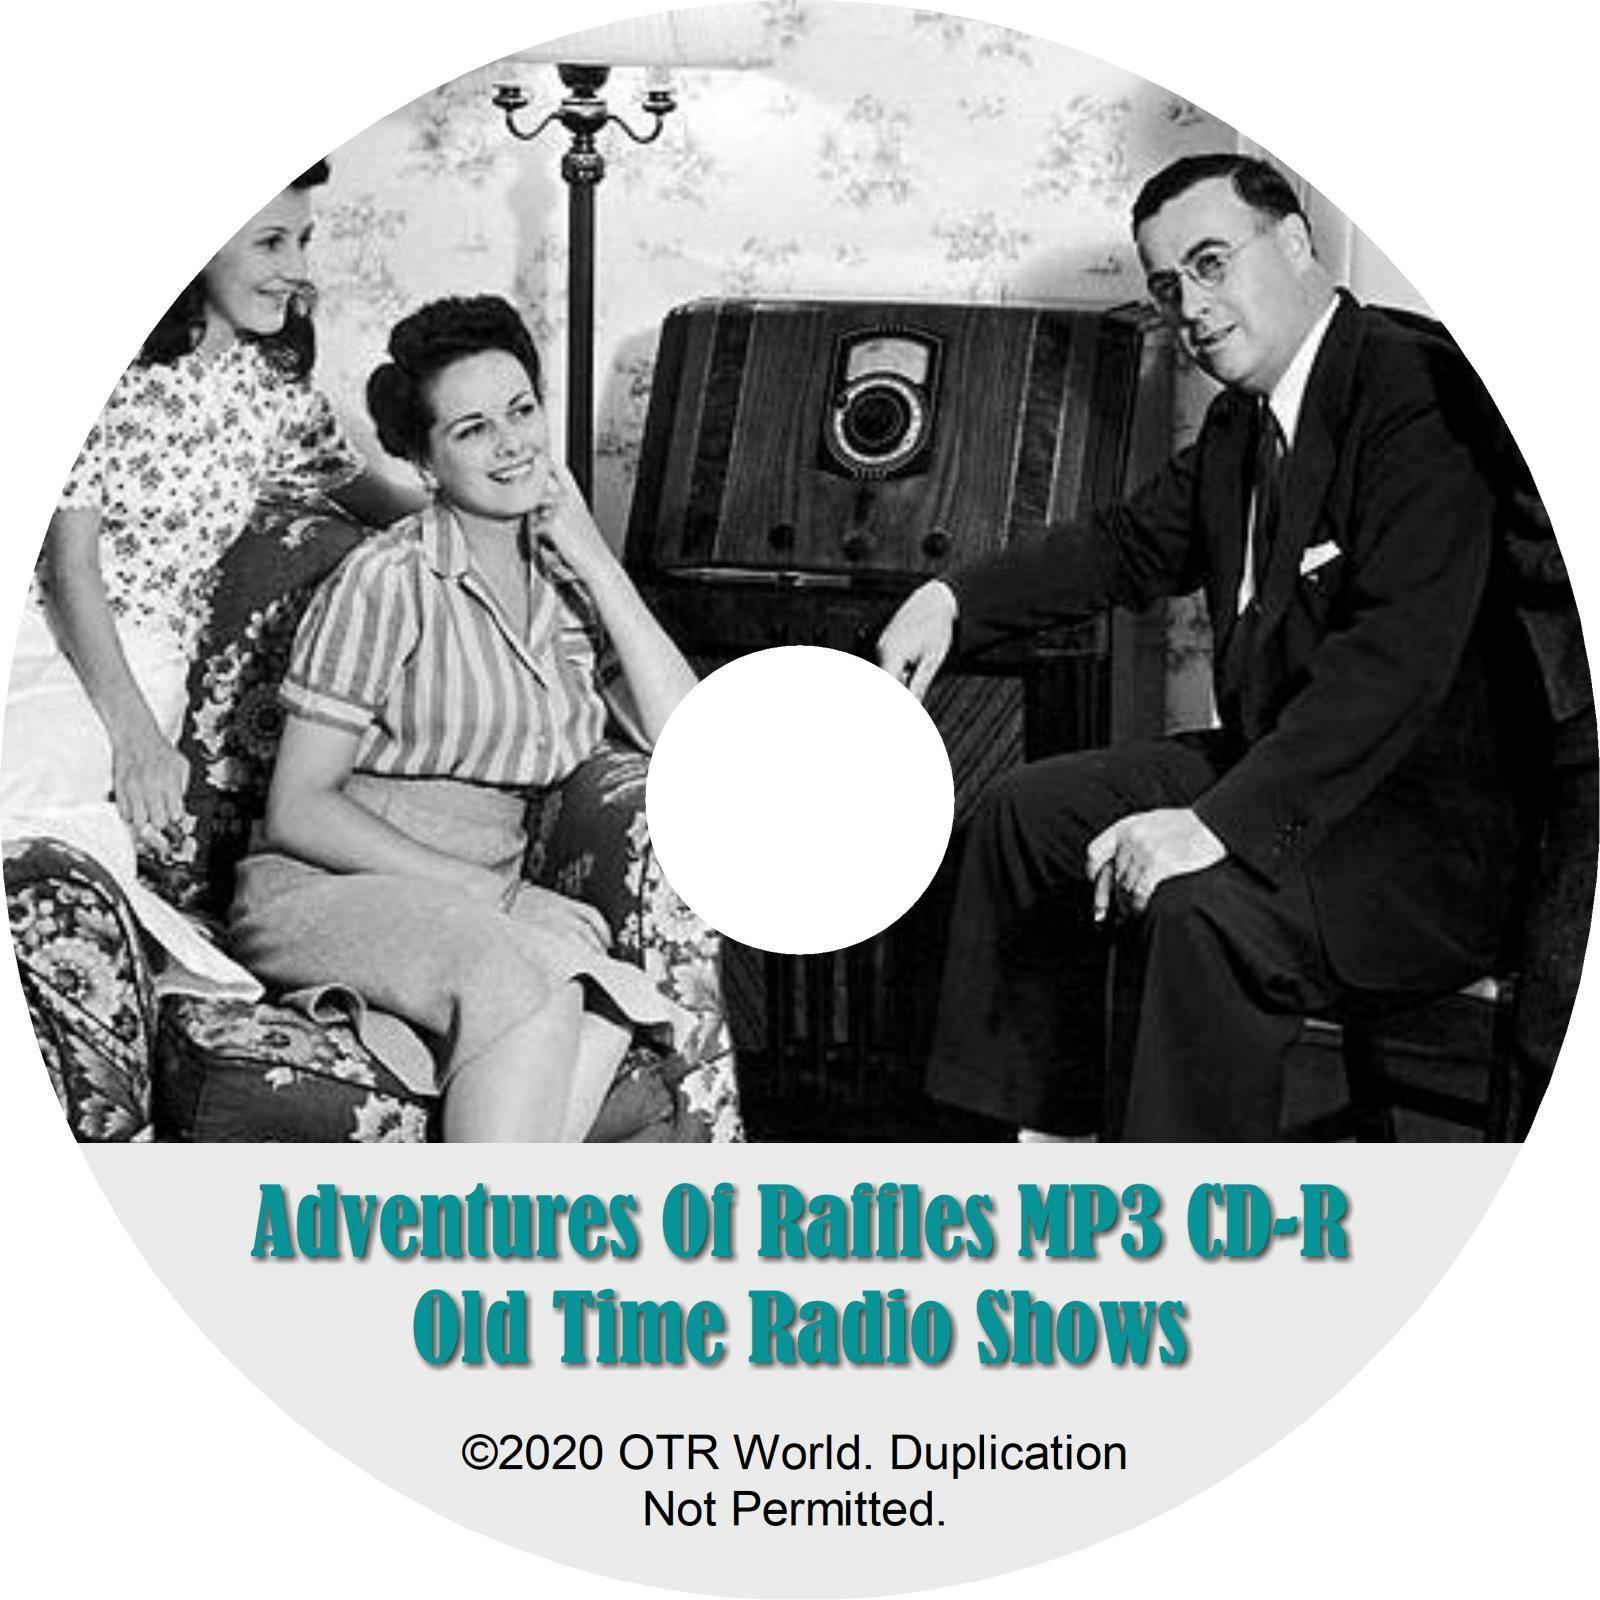 The Adventures Of Raffles OTR Old Time Radio Shows MP3 On CD 4 Episodes - OTR World